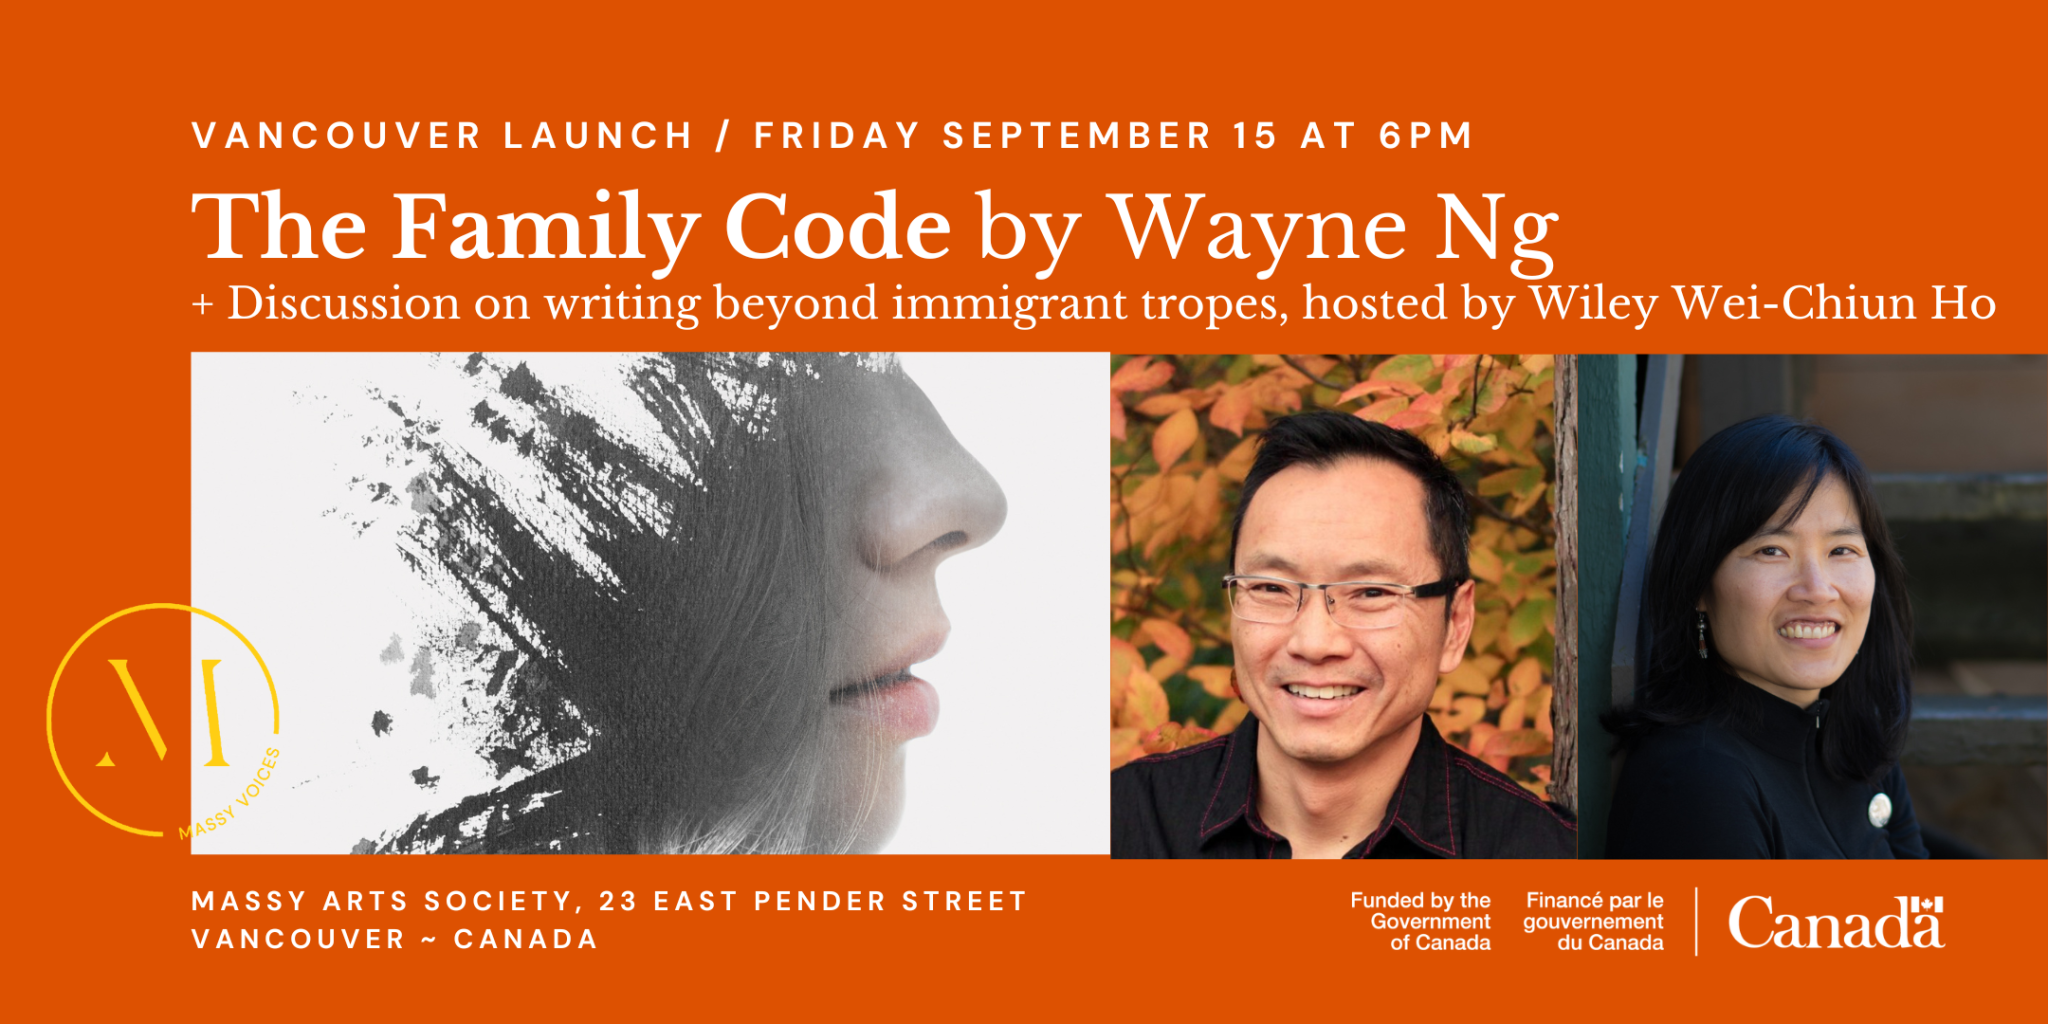 Vancouver Launch / Friday September 15 at 6pm The Family Code by Wayne + Discussion on writing beyond immigrant tropes, hosted by Wiley Wei-Chiun Ho Massy Arts Society, 23 East Pender Street Vancouver - Canada